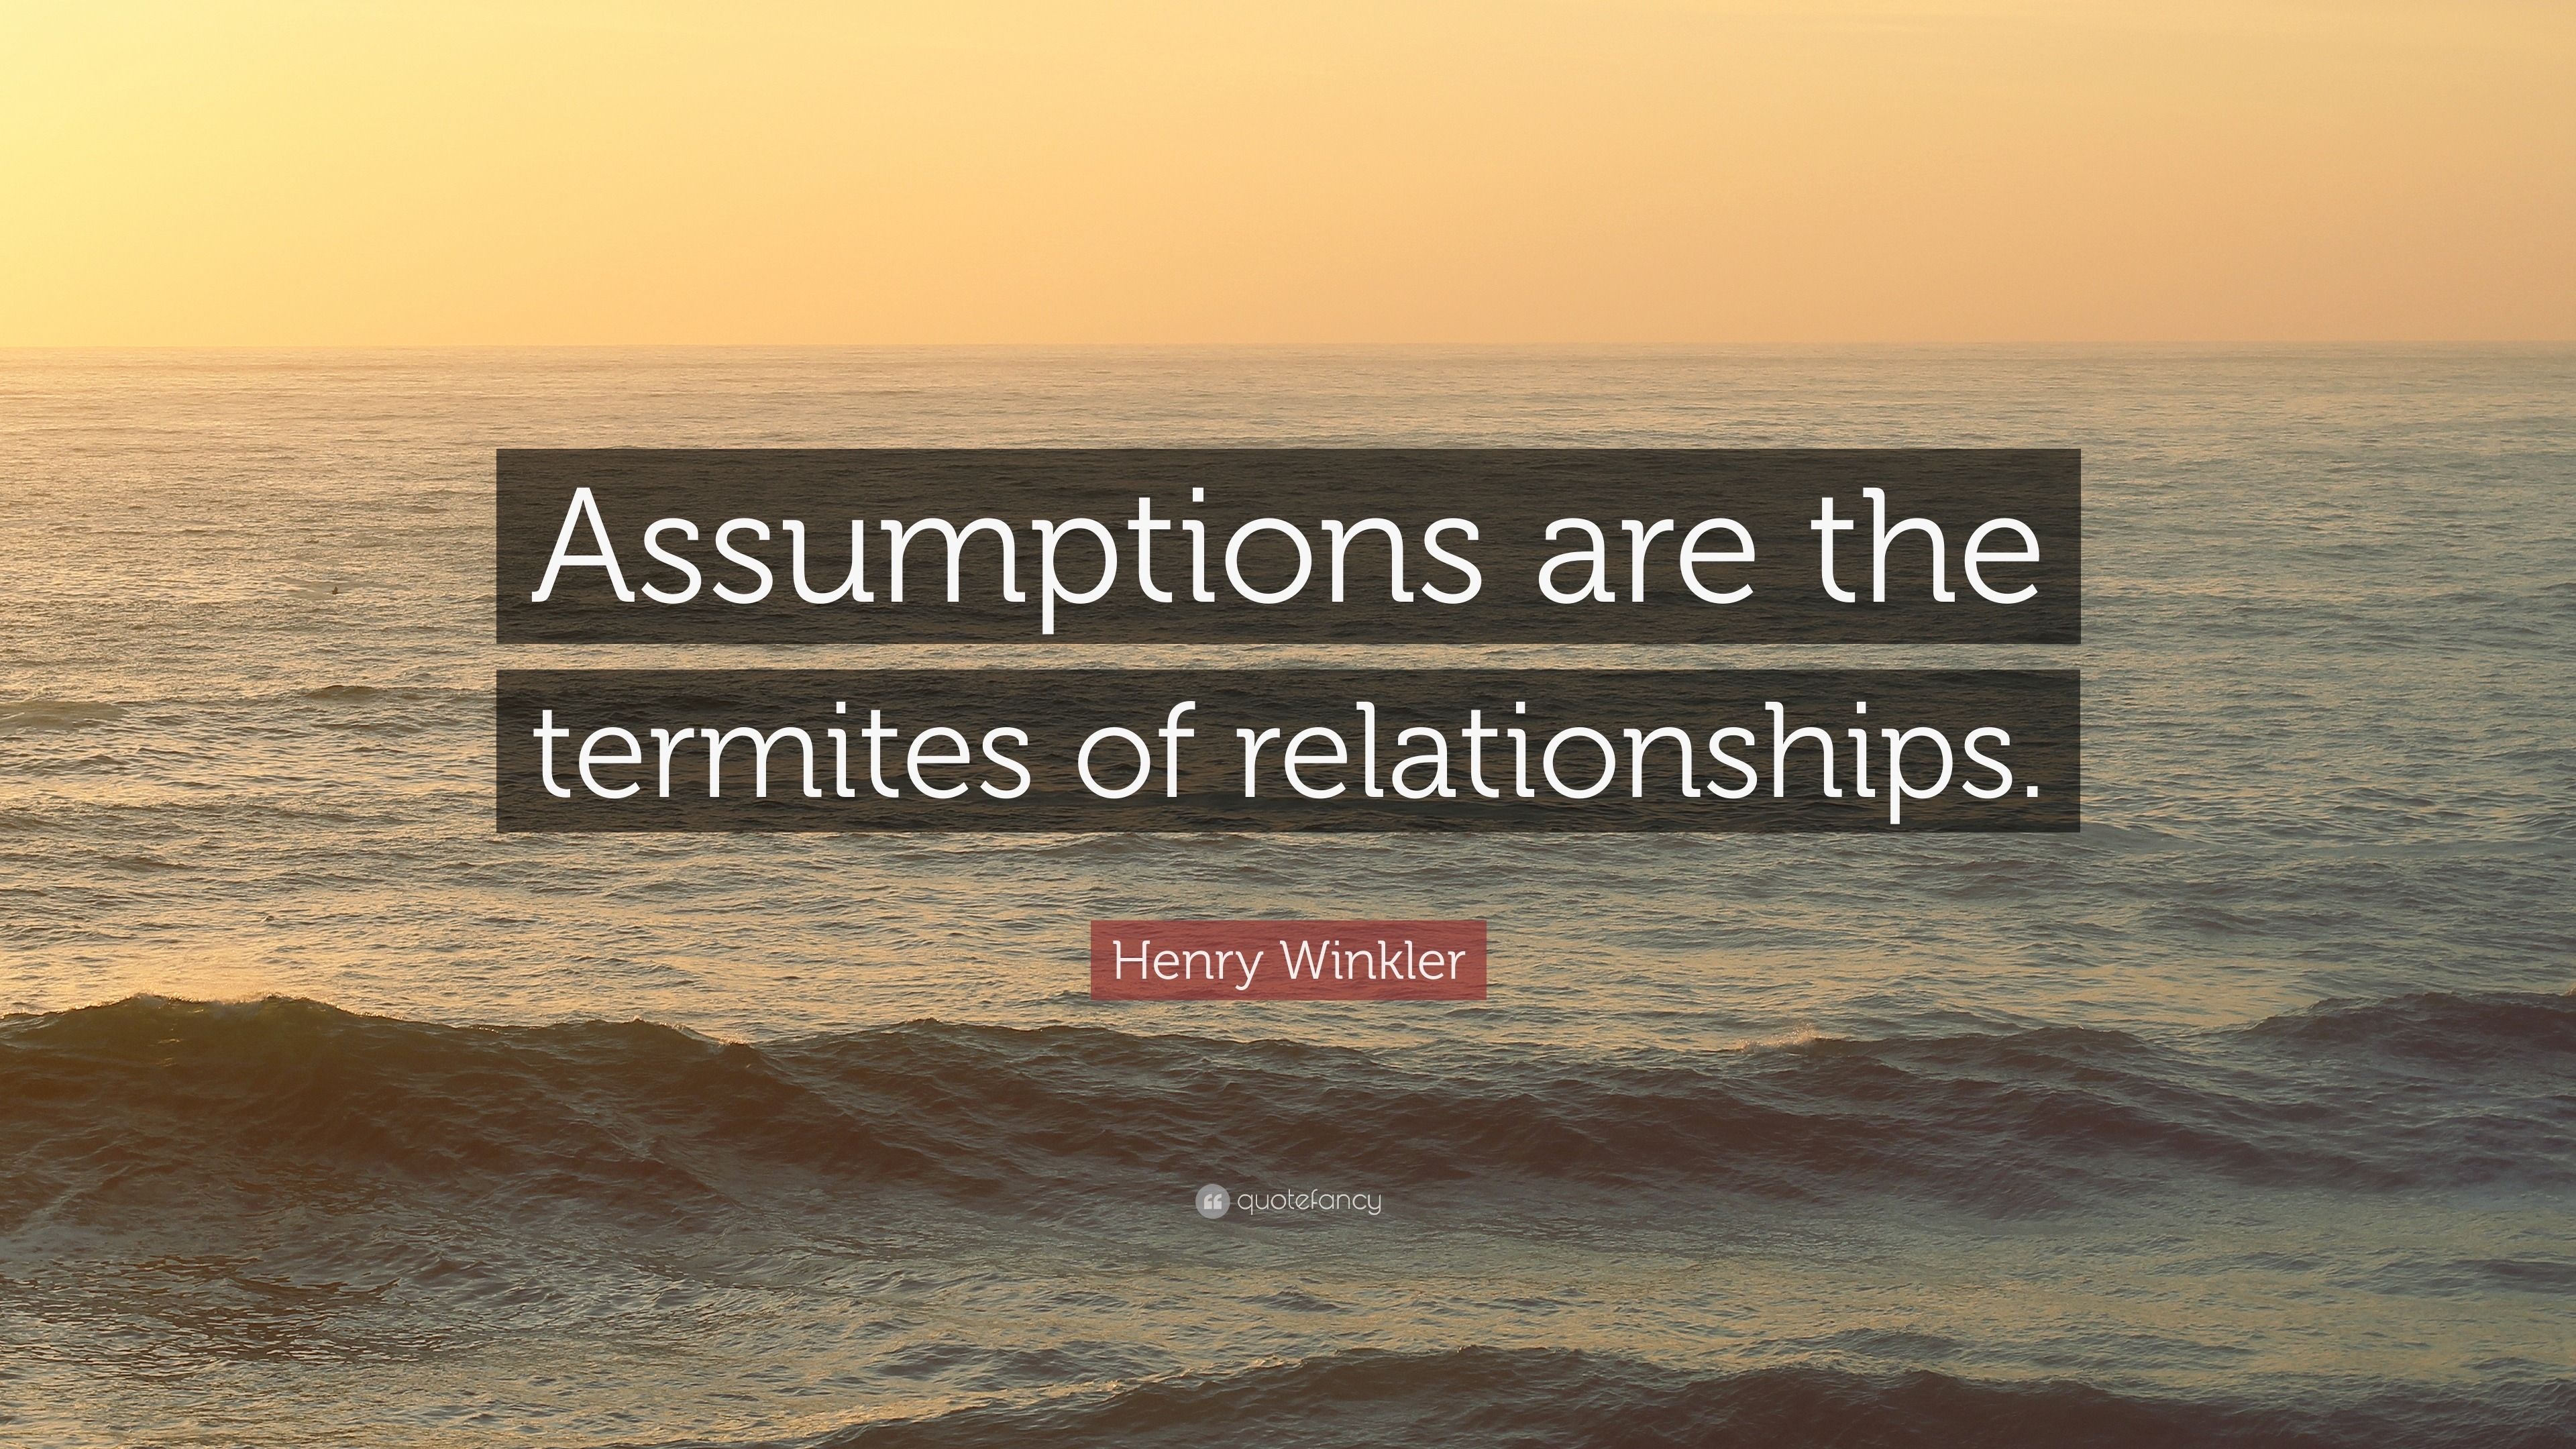 1710053 Henry Winkler Quote Assumptions are the termites of relationships